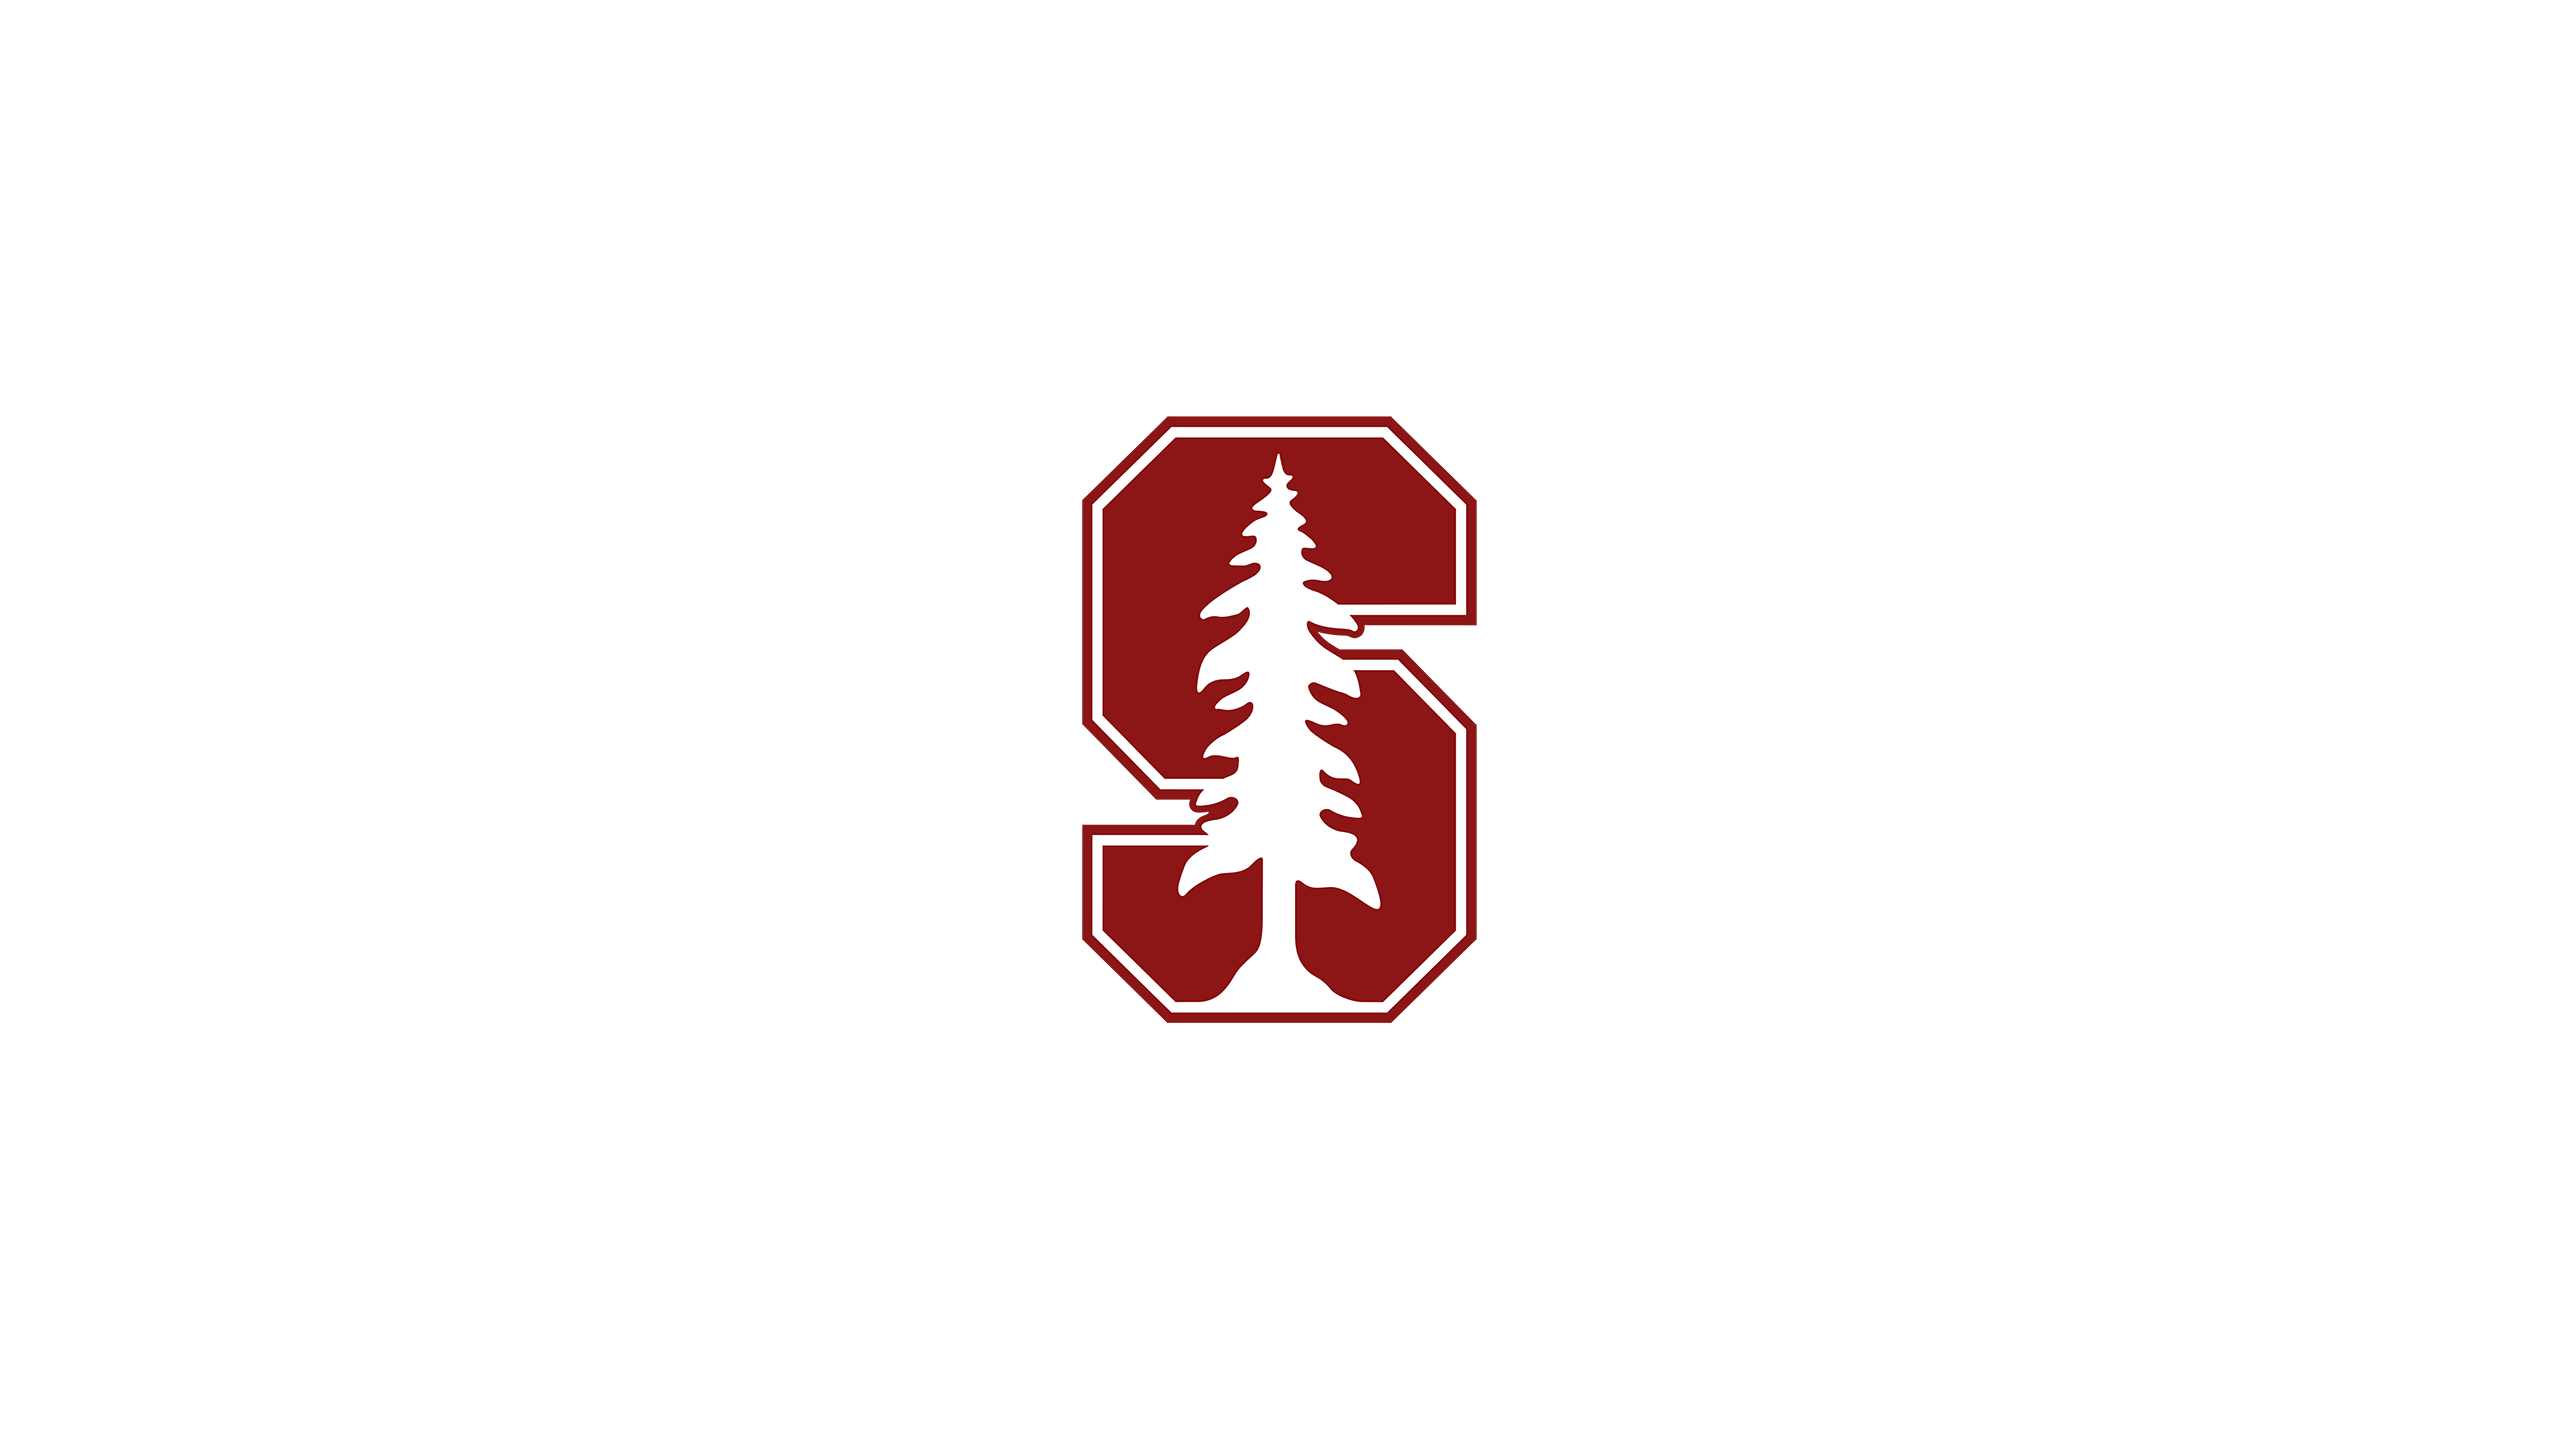 Stanford Cardinal Basketball - NCAAB - Square Bettor